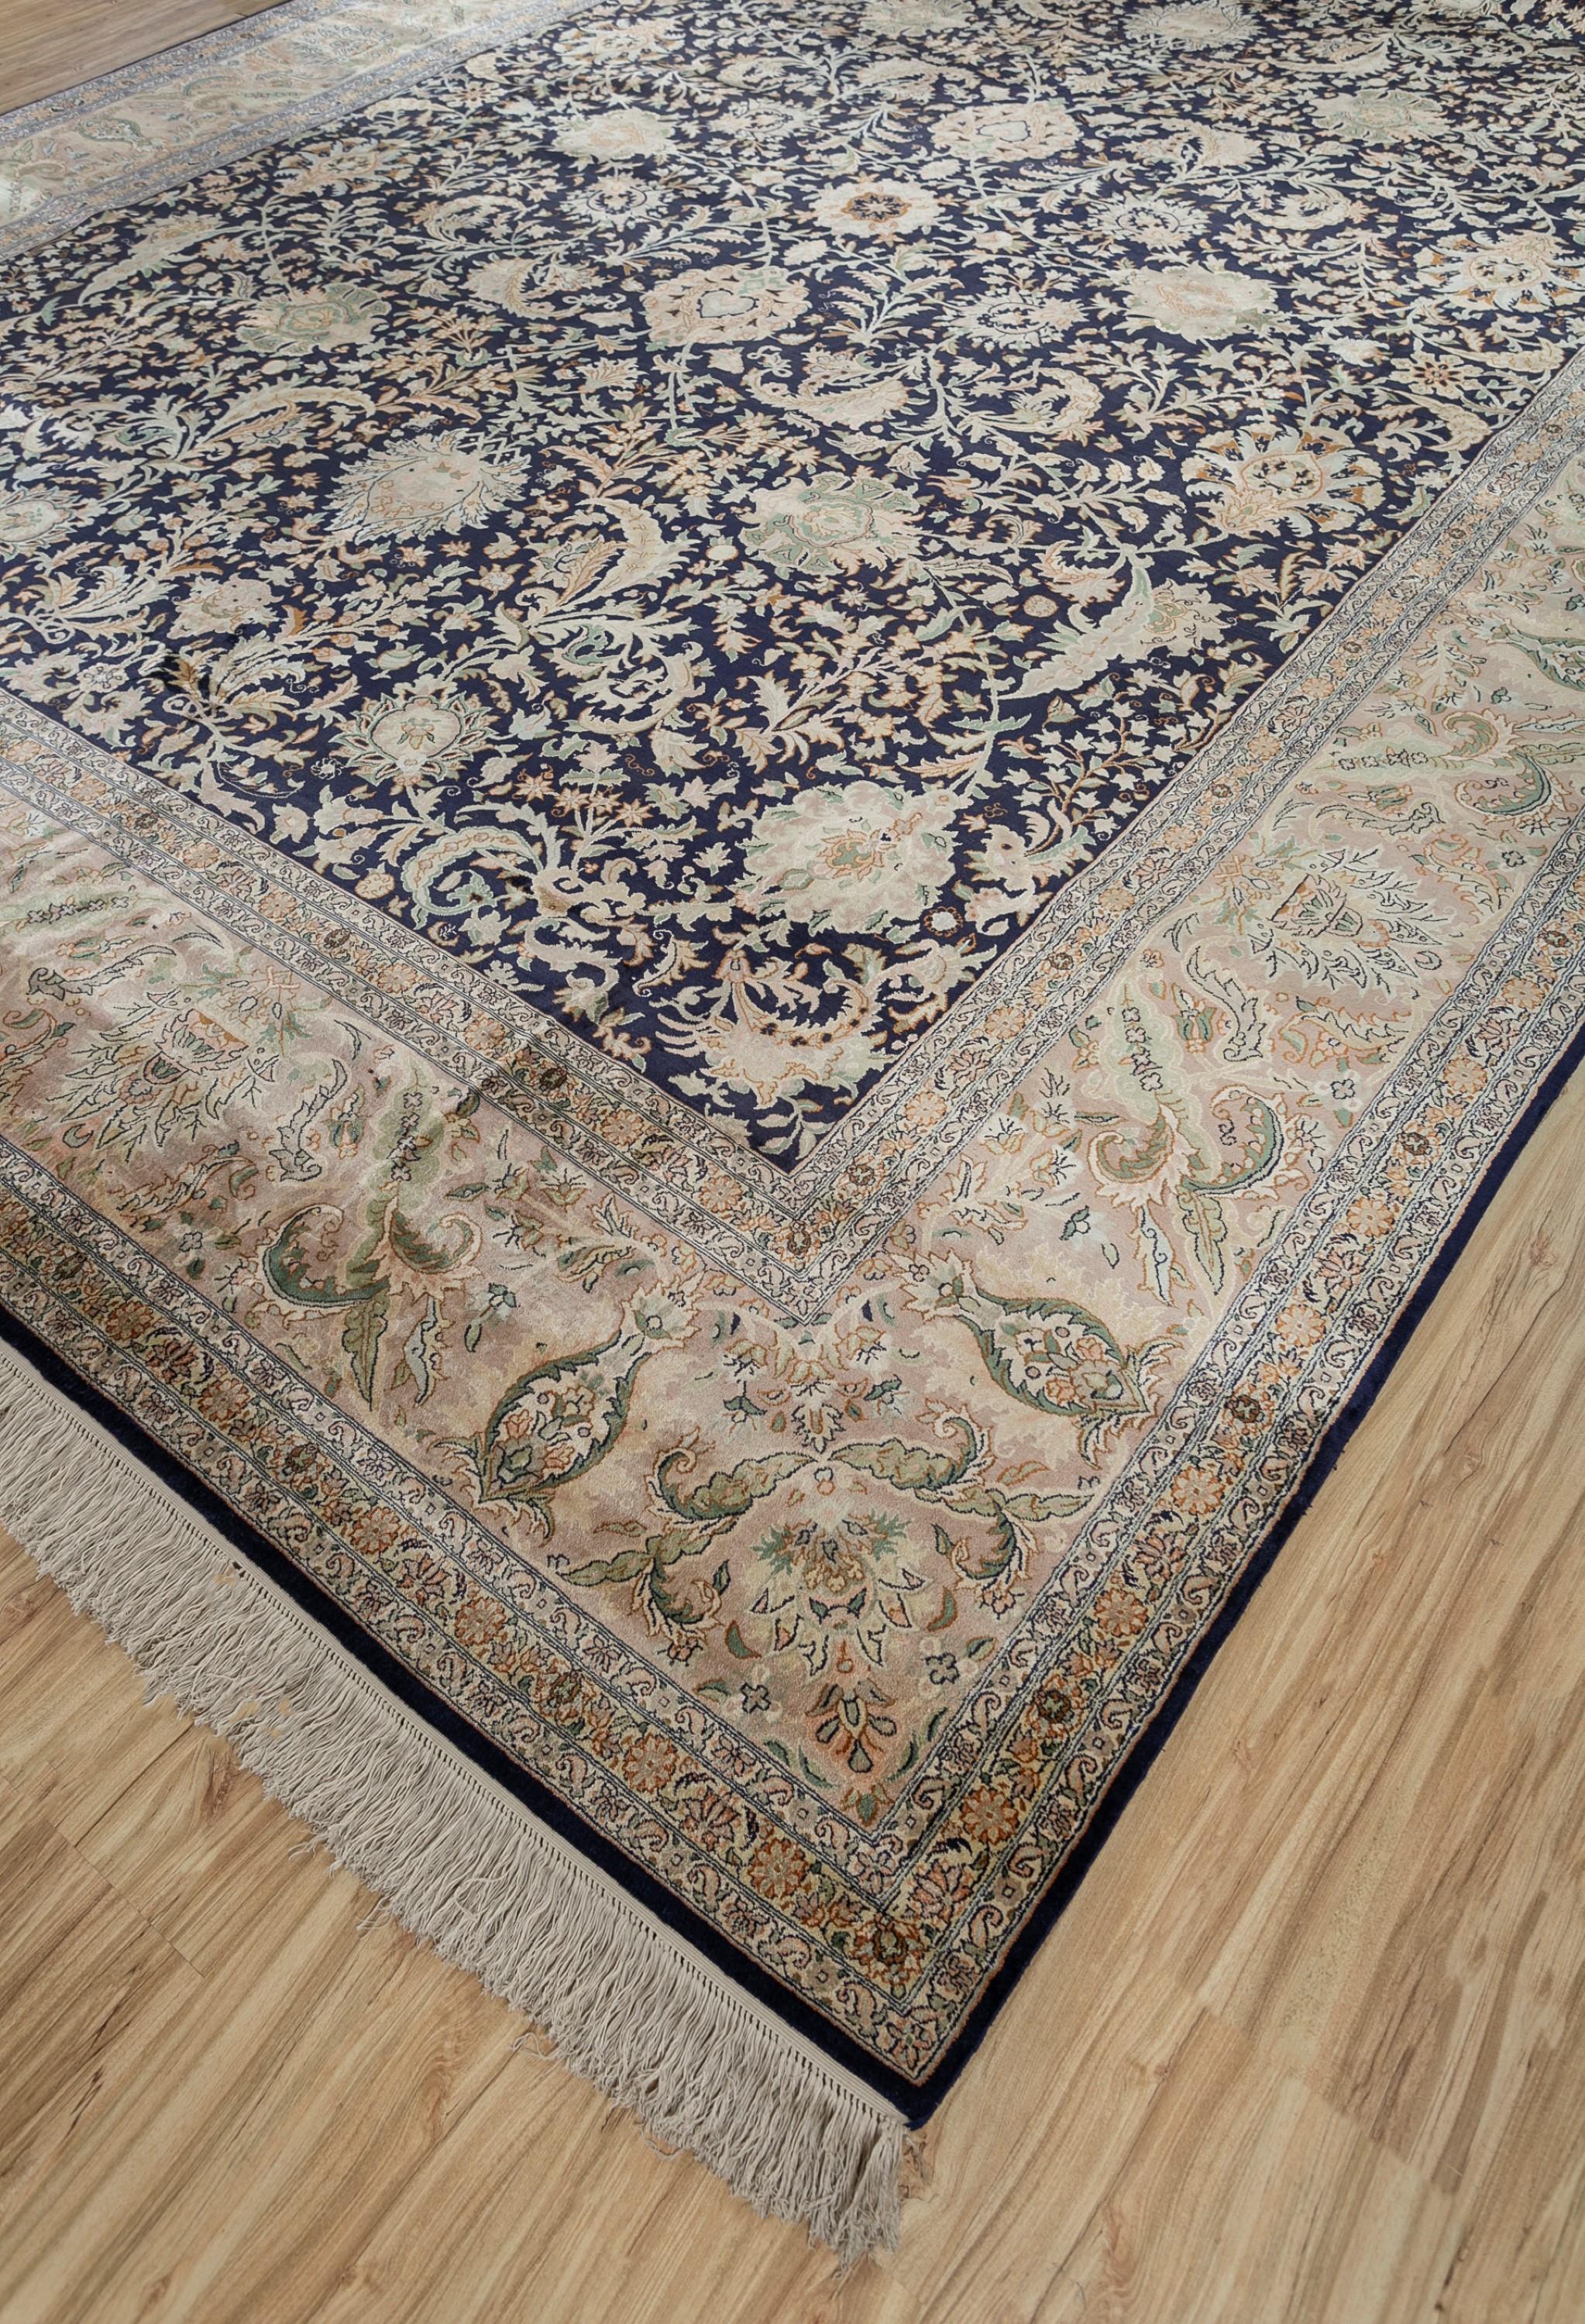 Indian Echoes of Paradise Medieval Blue & Soft Beige 270X375 cm Handknotted Rug For Sale